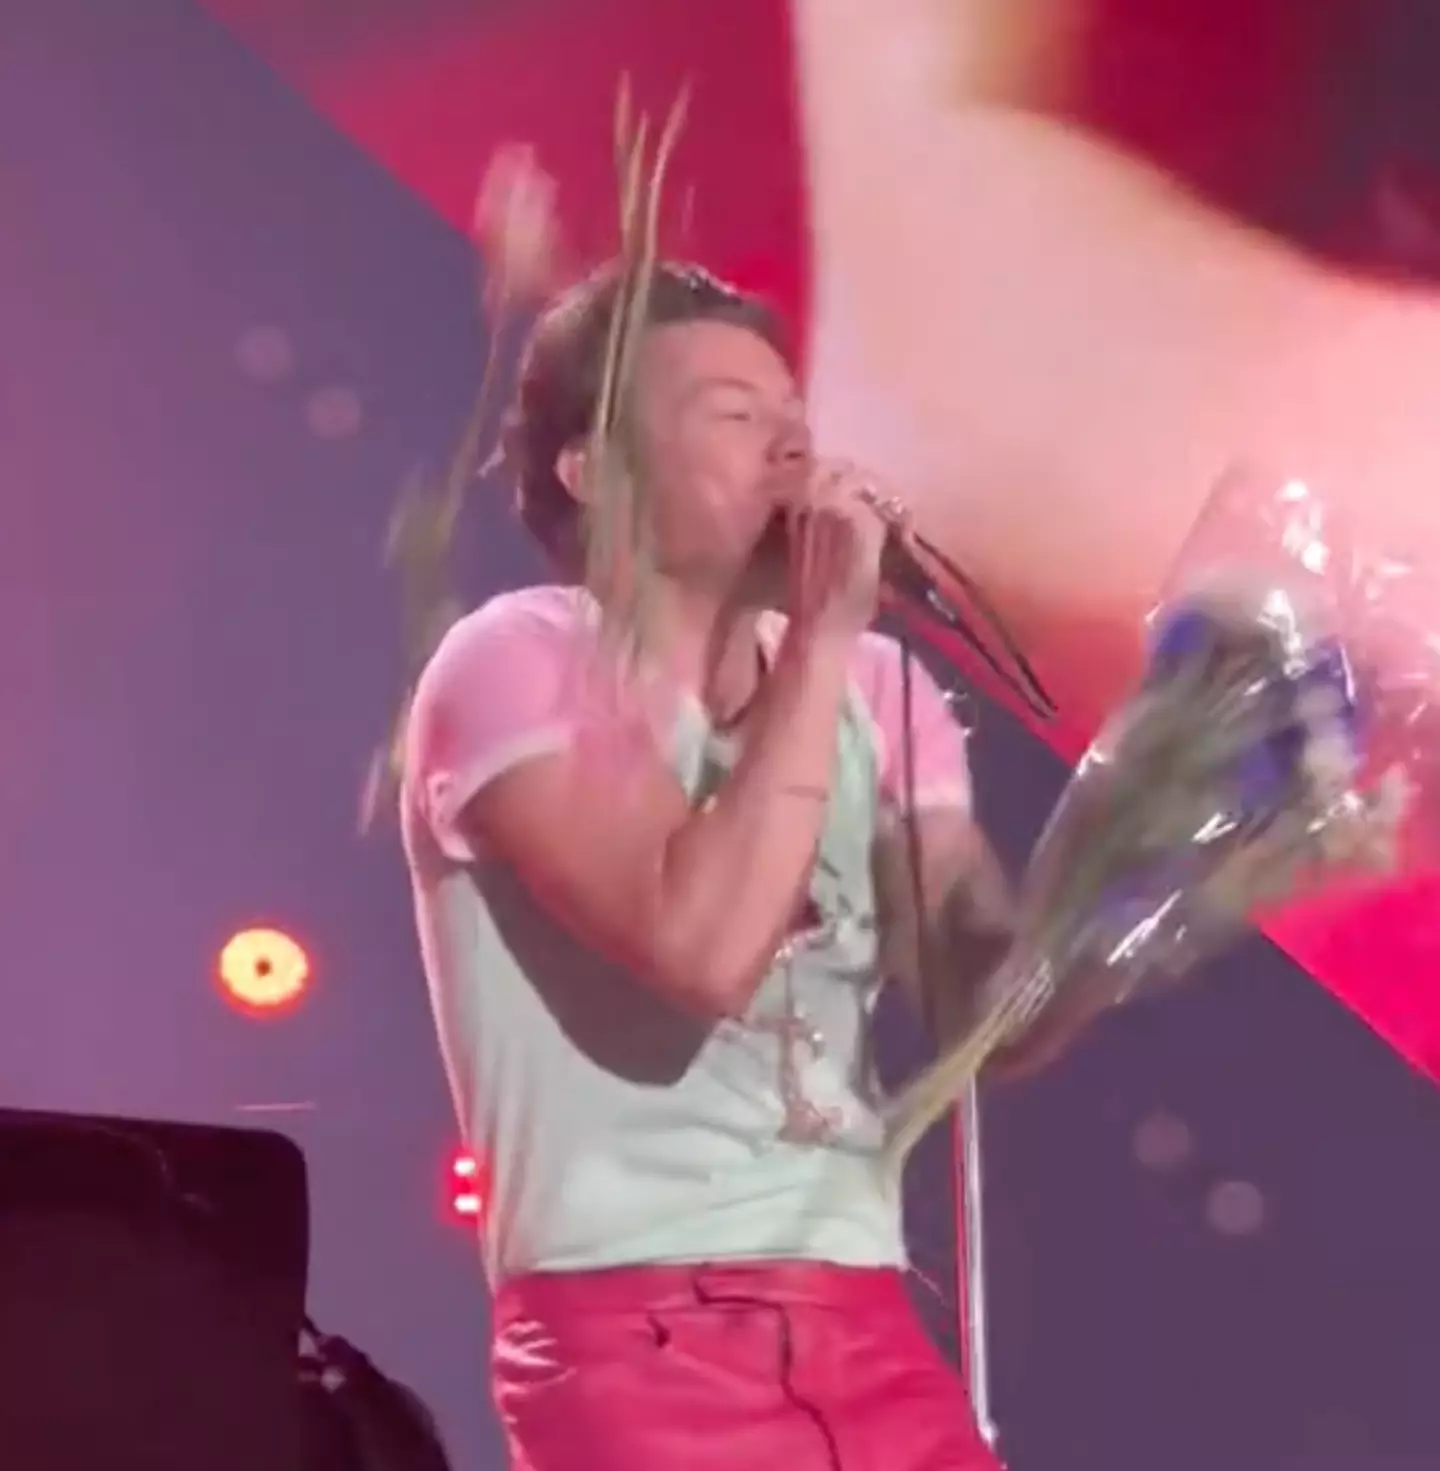 Harry Styles tried to bat away the flowers as they flew towards him.